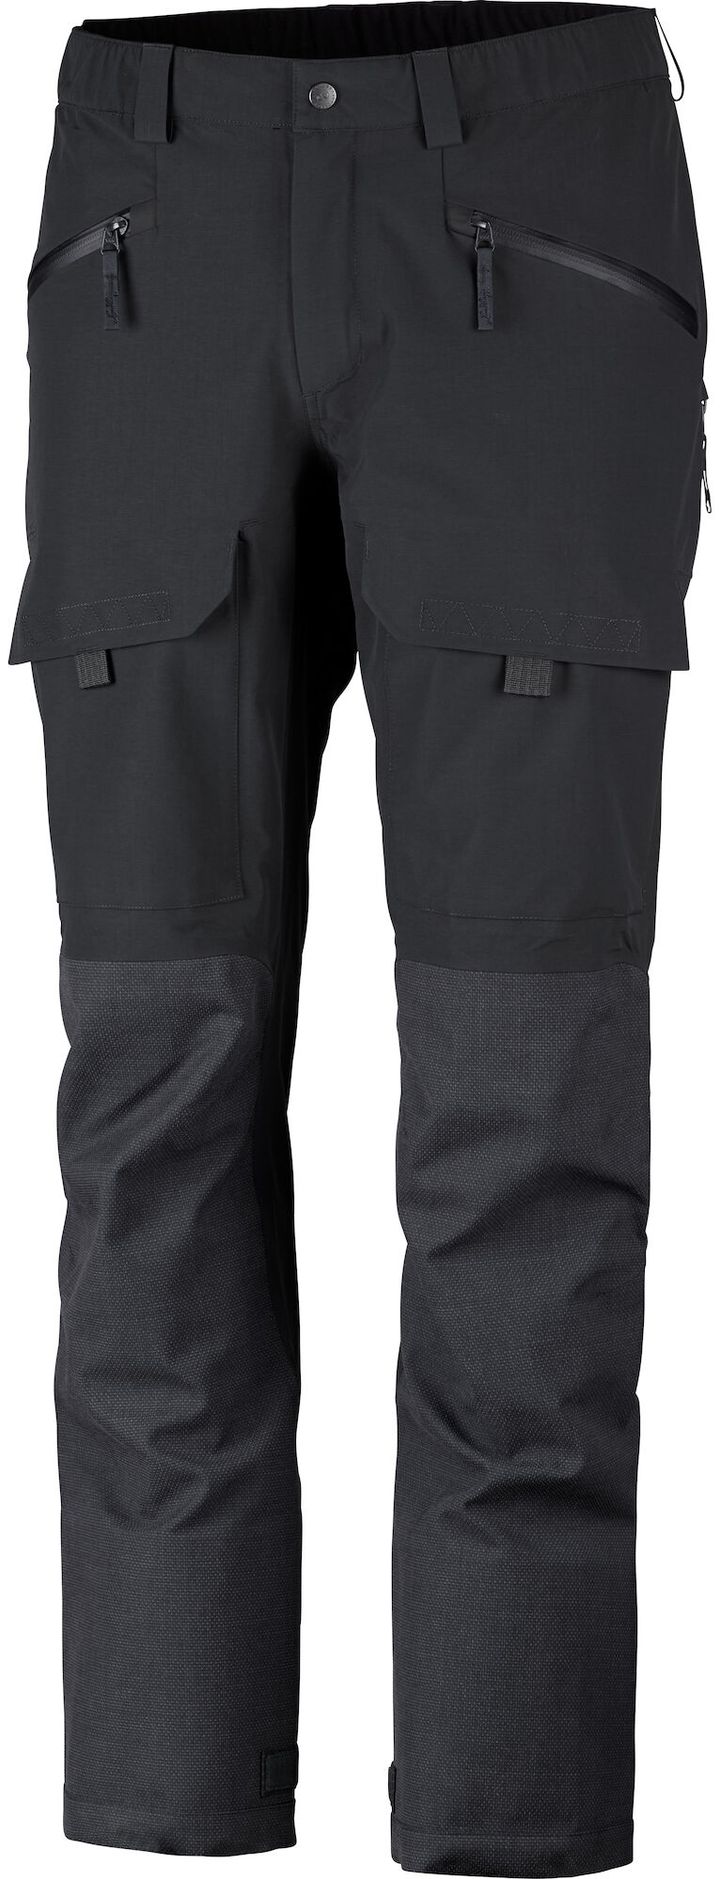 Lundhags Ocke Ms Pant Charcoal Lundhags